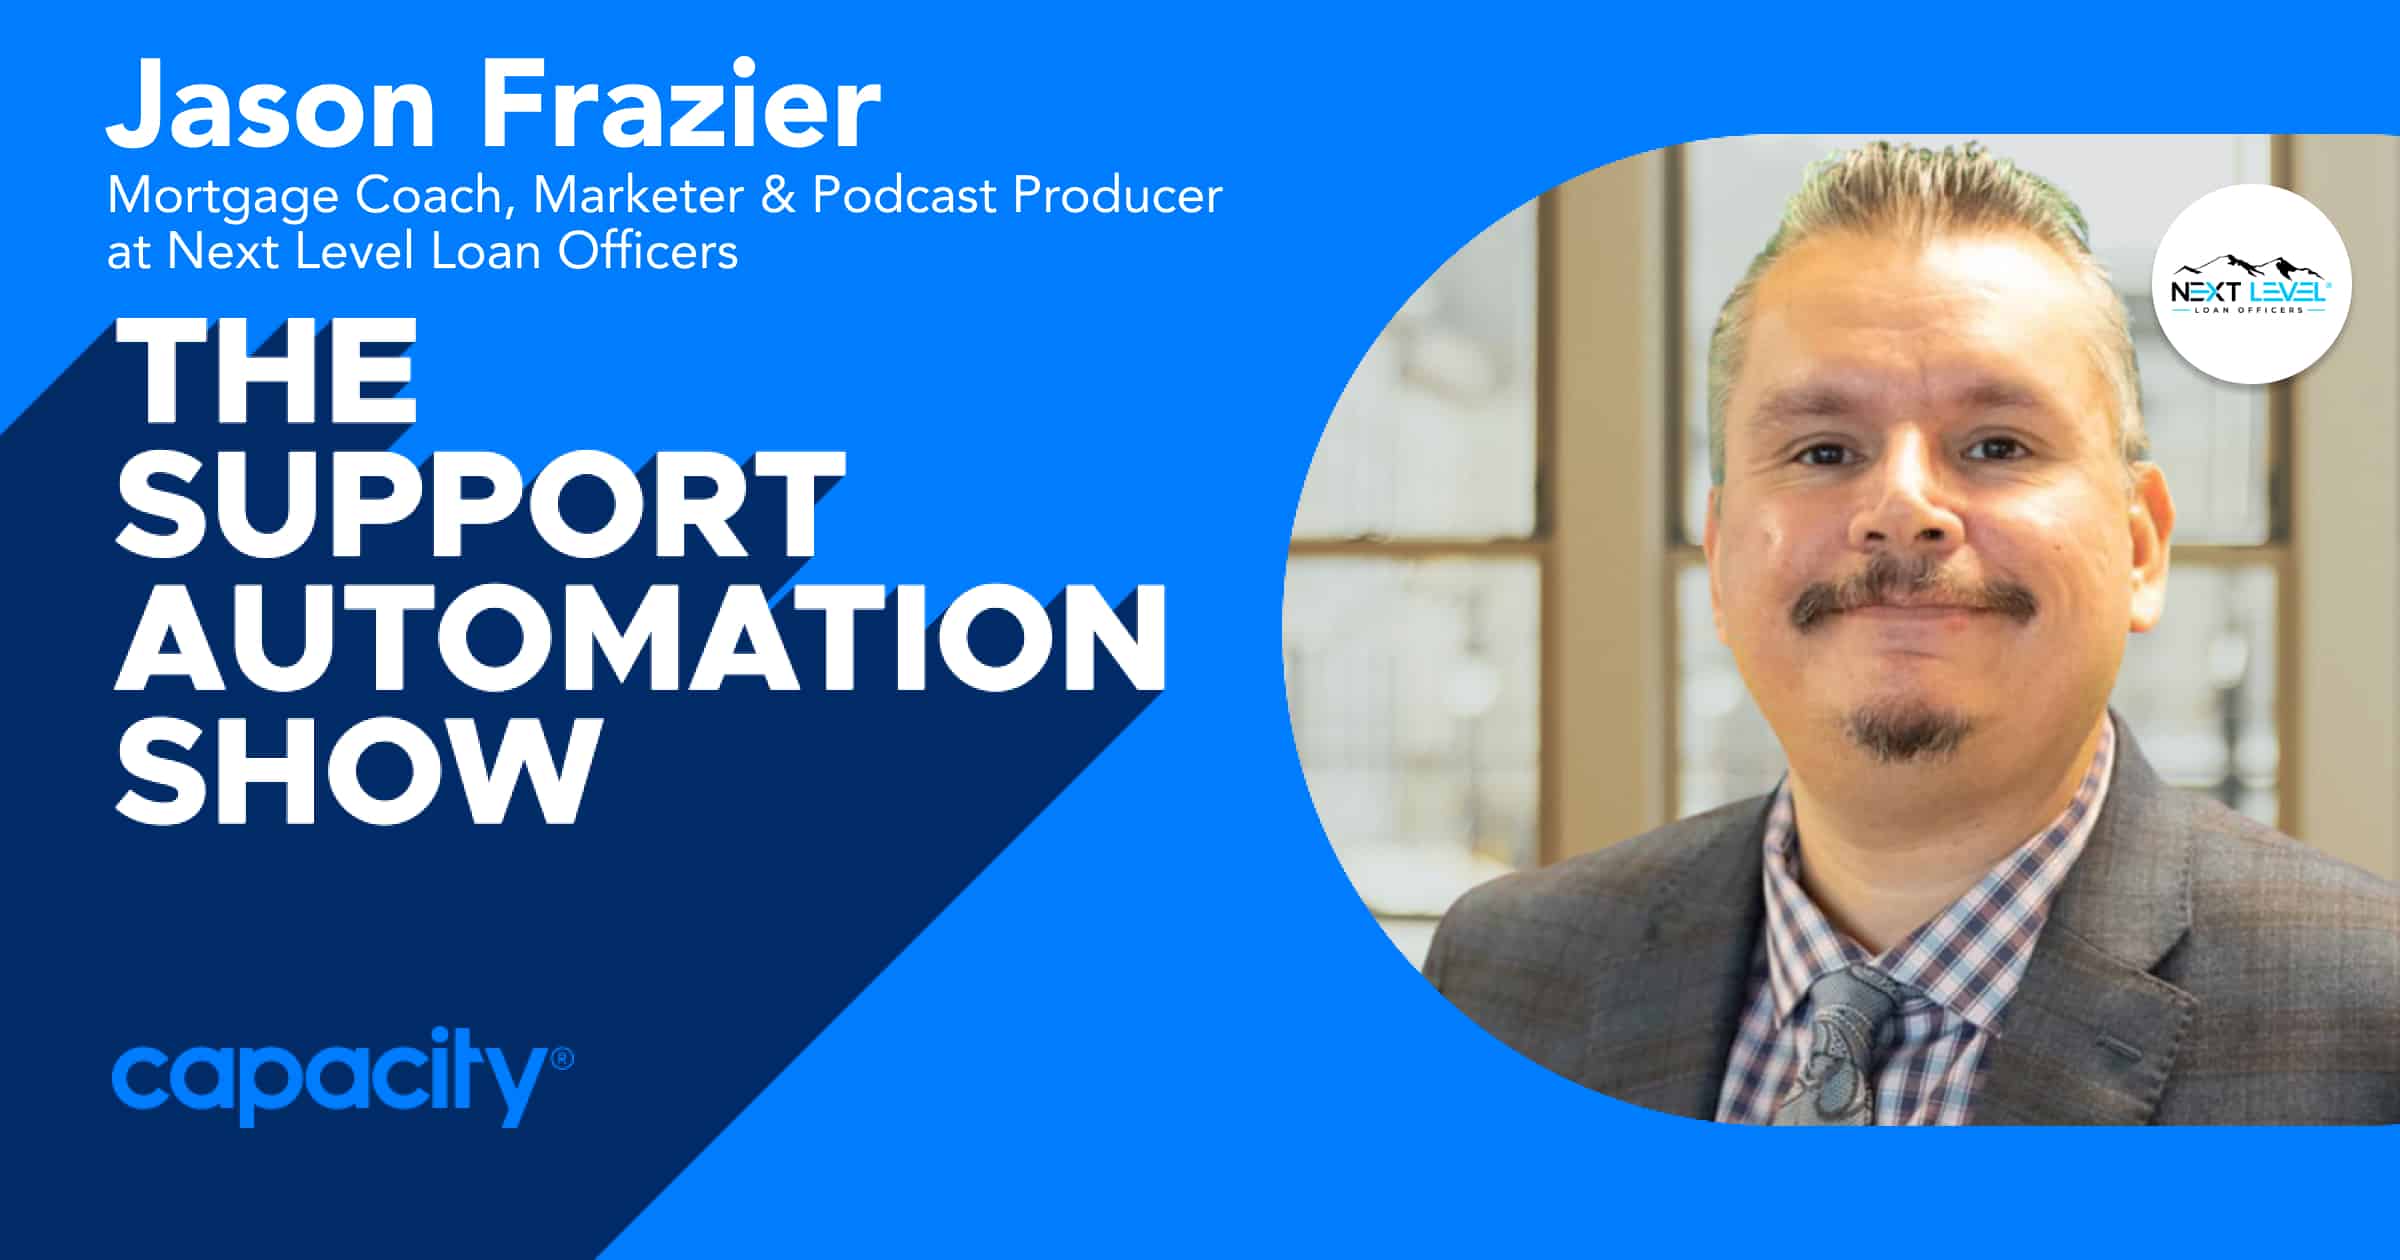 The Support Automation Show Episode 34 with Jason Frazier